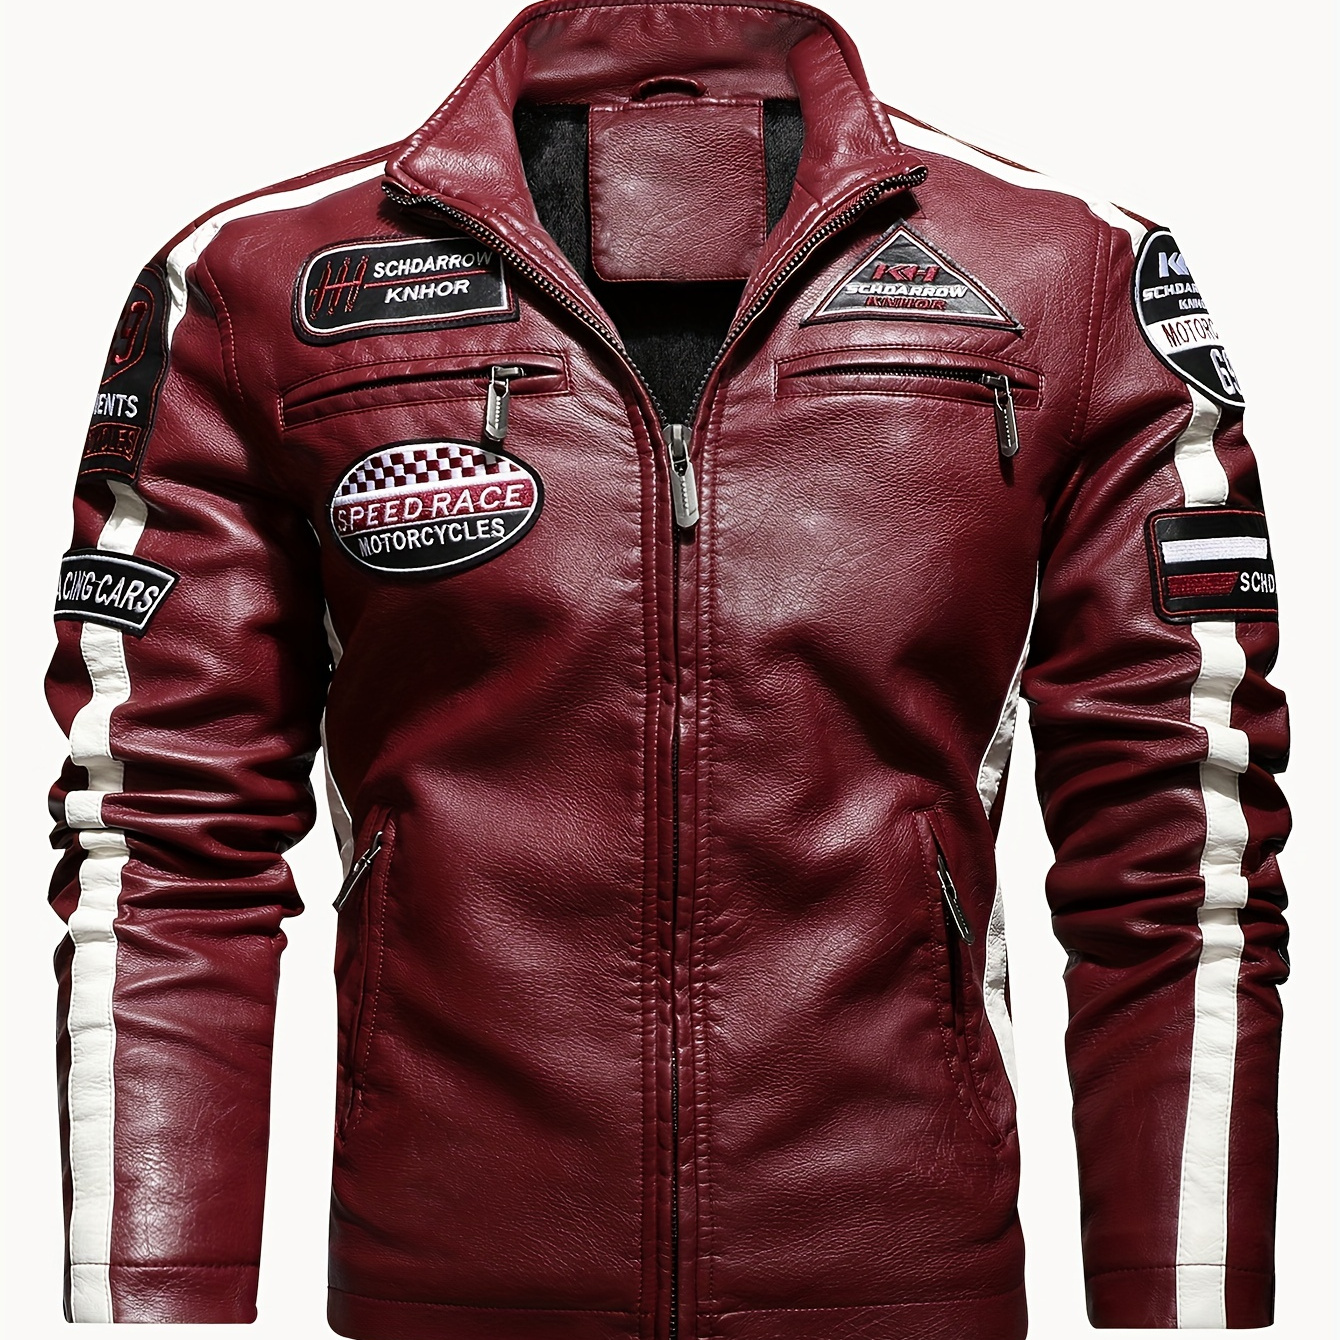 

Men's Long Sleeve And Zipper Down Motorcycle Jacket With Stand Collar And Patchwork Pieces, Stylish And Chic Jacket For Autumn And Winter Leisurewear